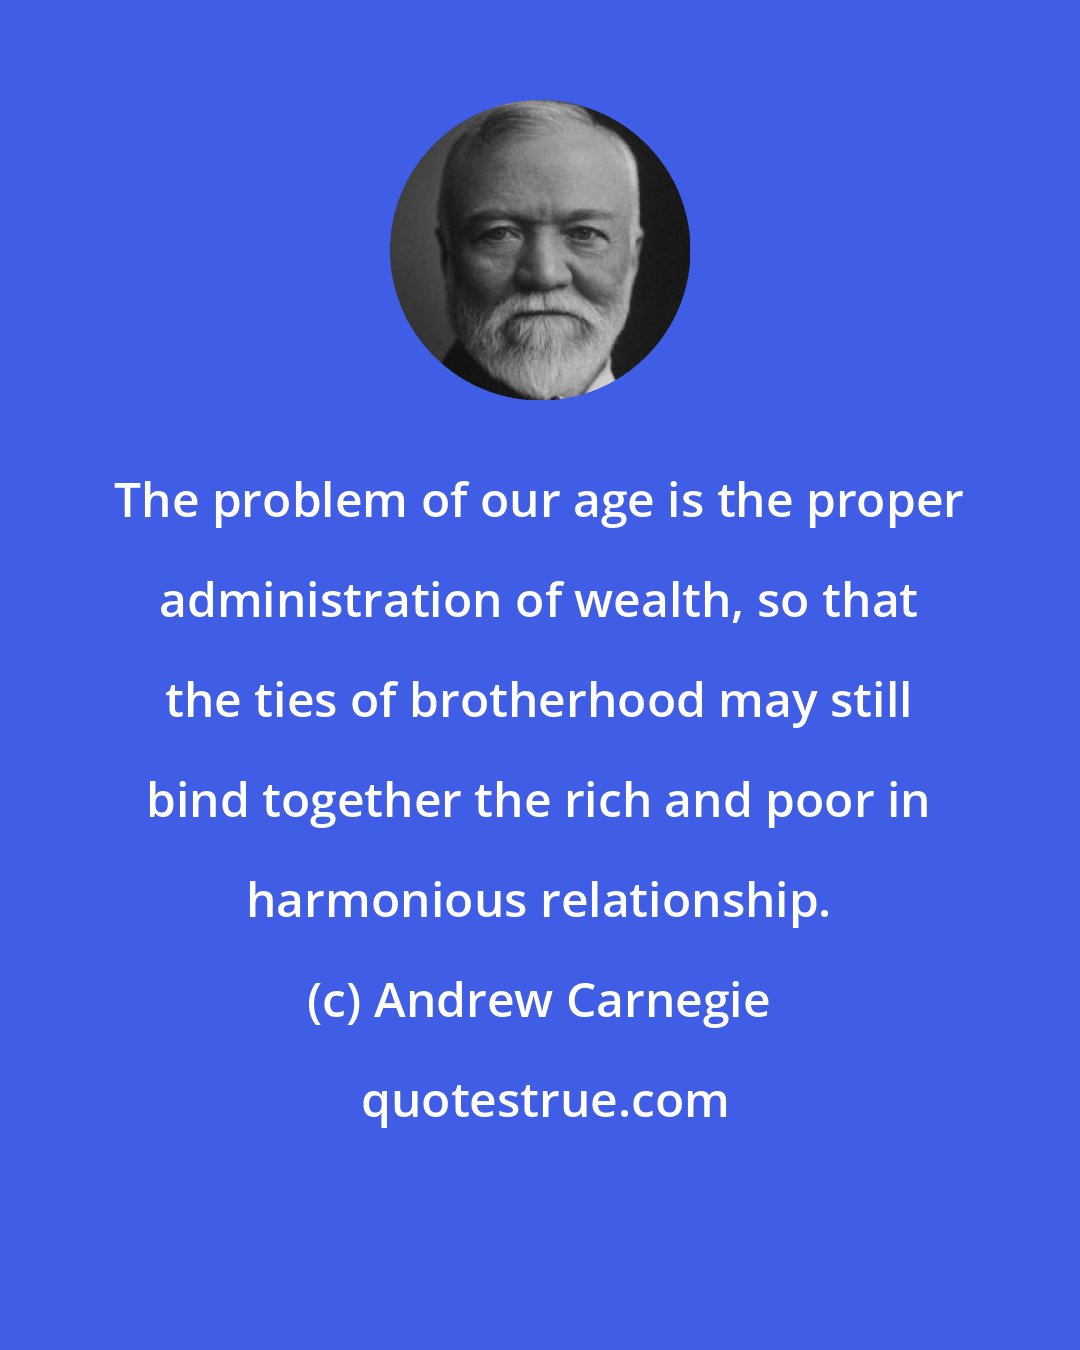 Andrew Carnegie: The problem of our age is the proper administration of wealth, so that the ties of brotherhood may still bind together the rich and poor in harmonious relationship.